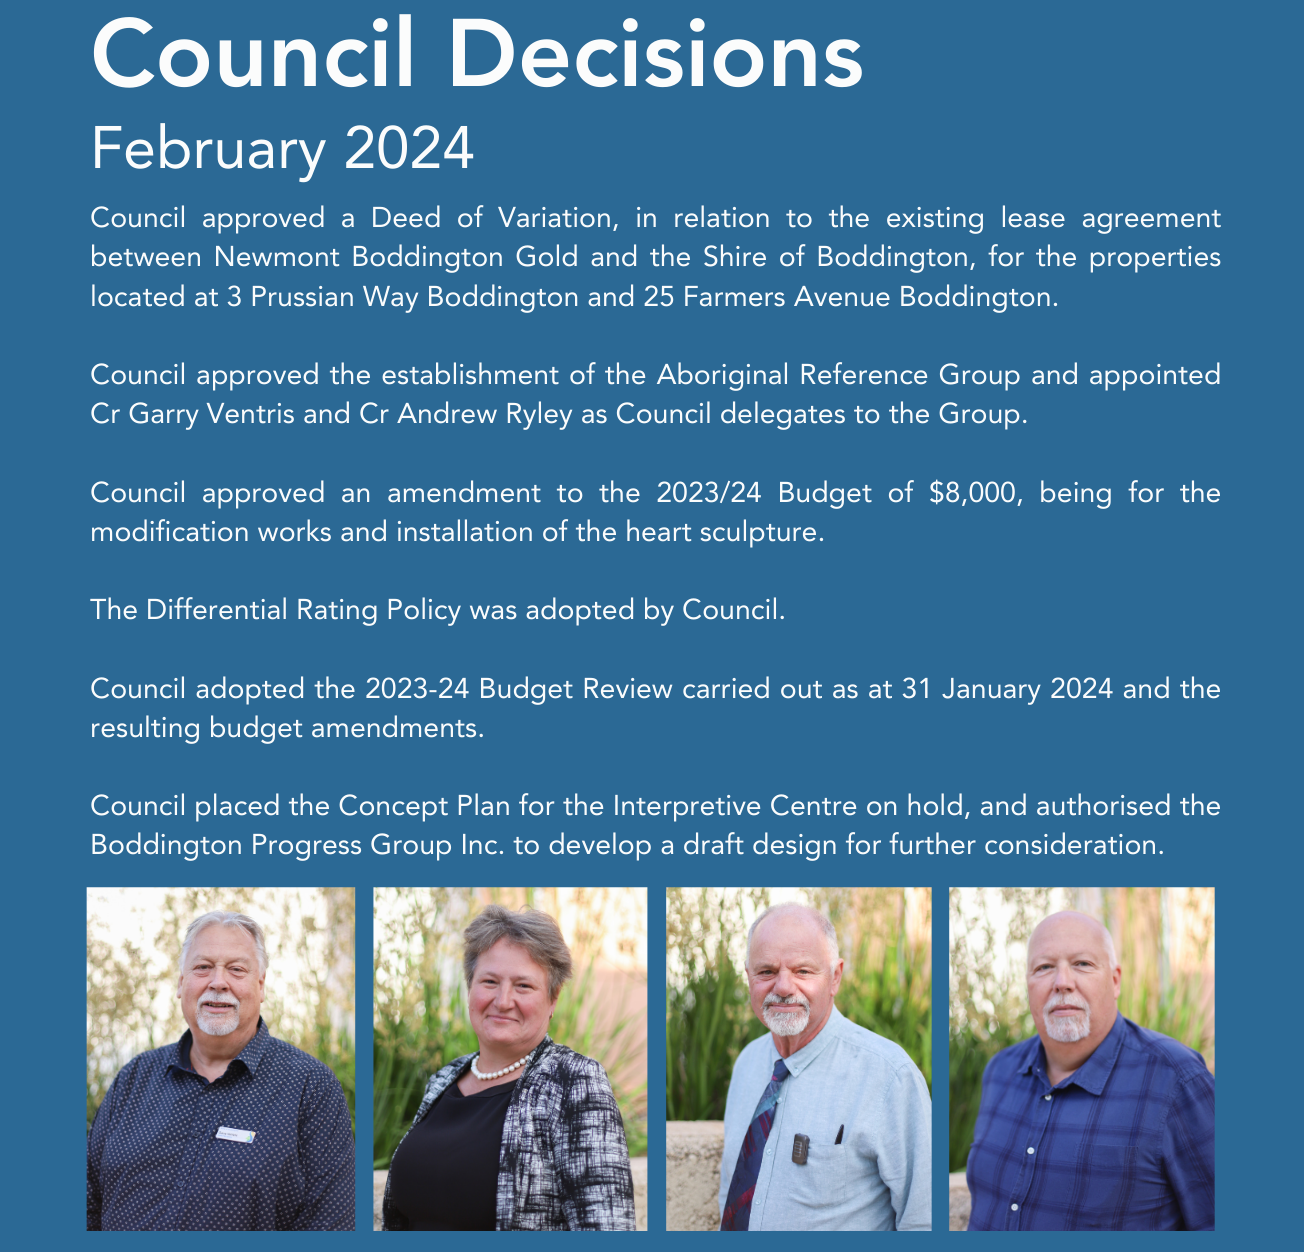 Council Decisions - February 2024